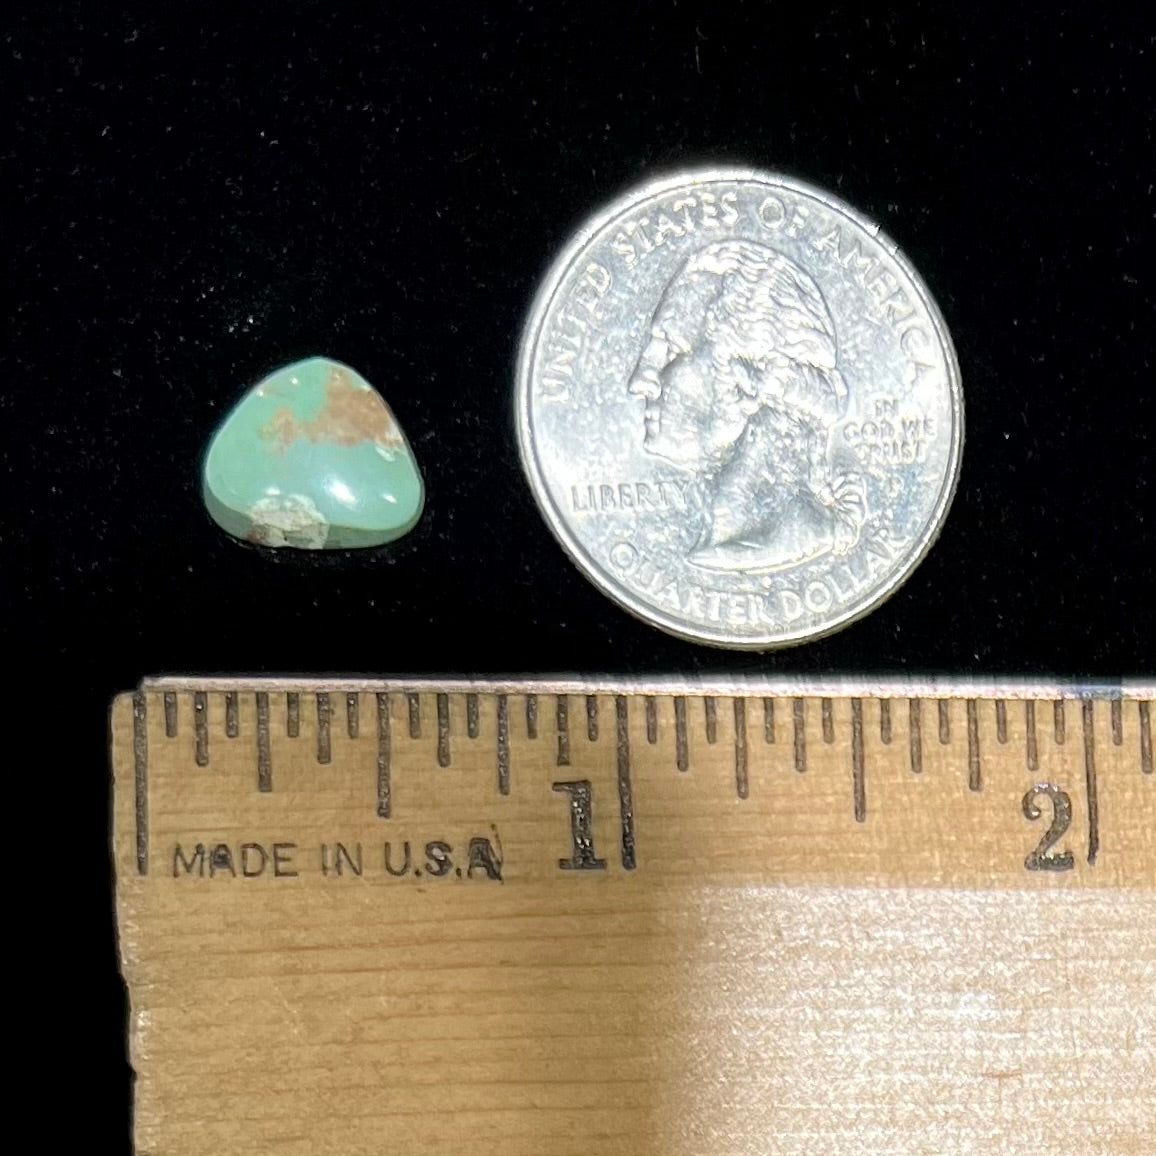 A loose, green Royston turquoise stone.  The stone has a brown matrix.